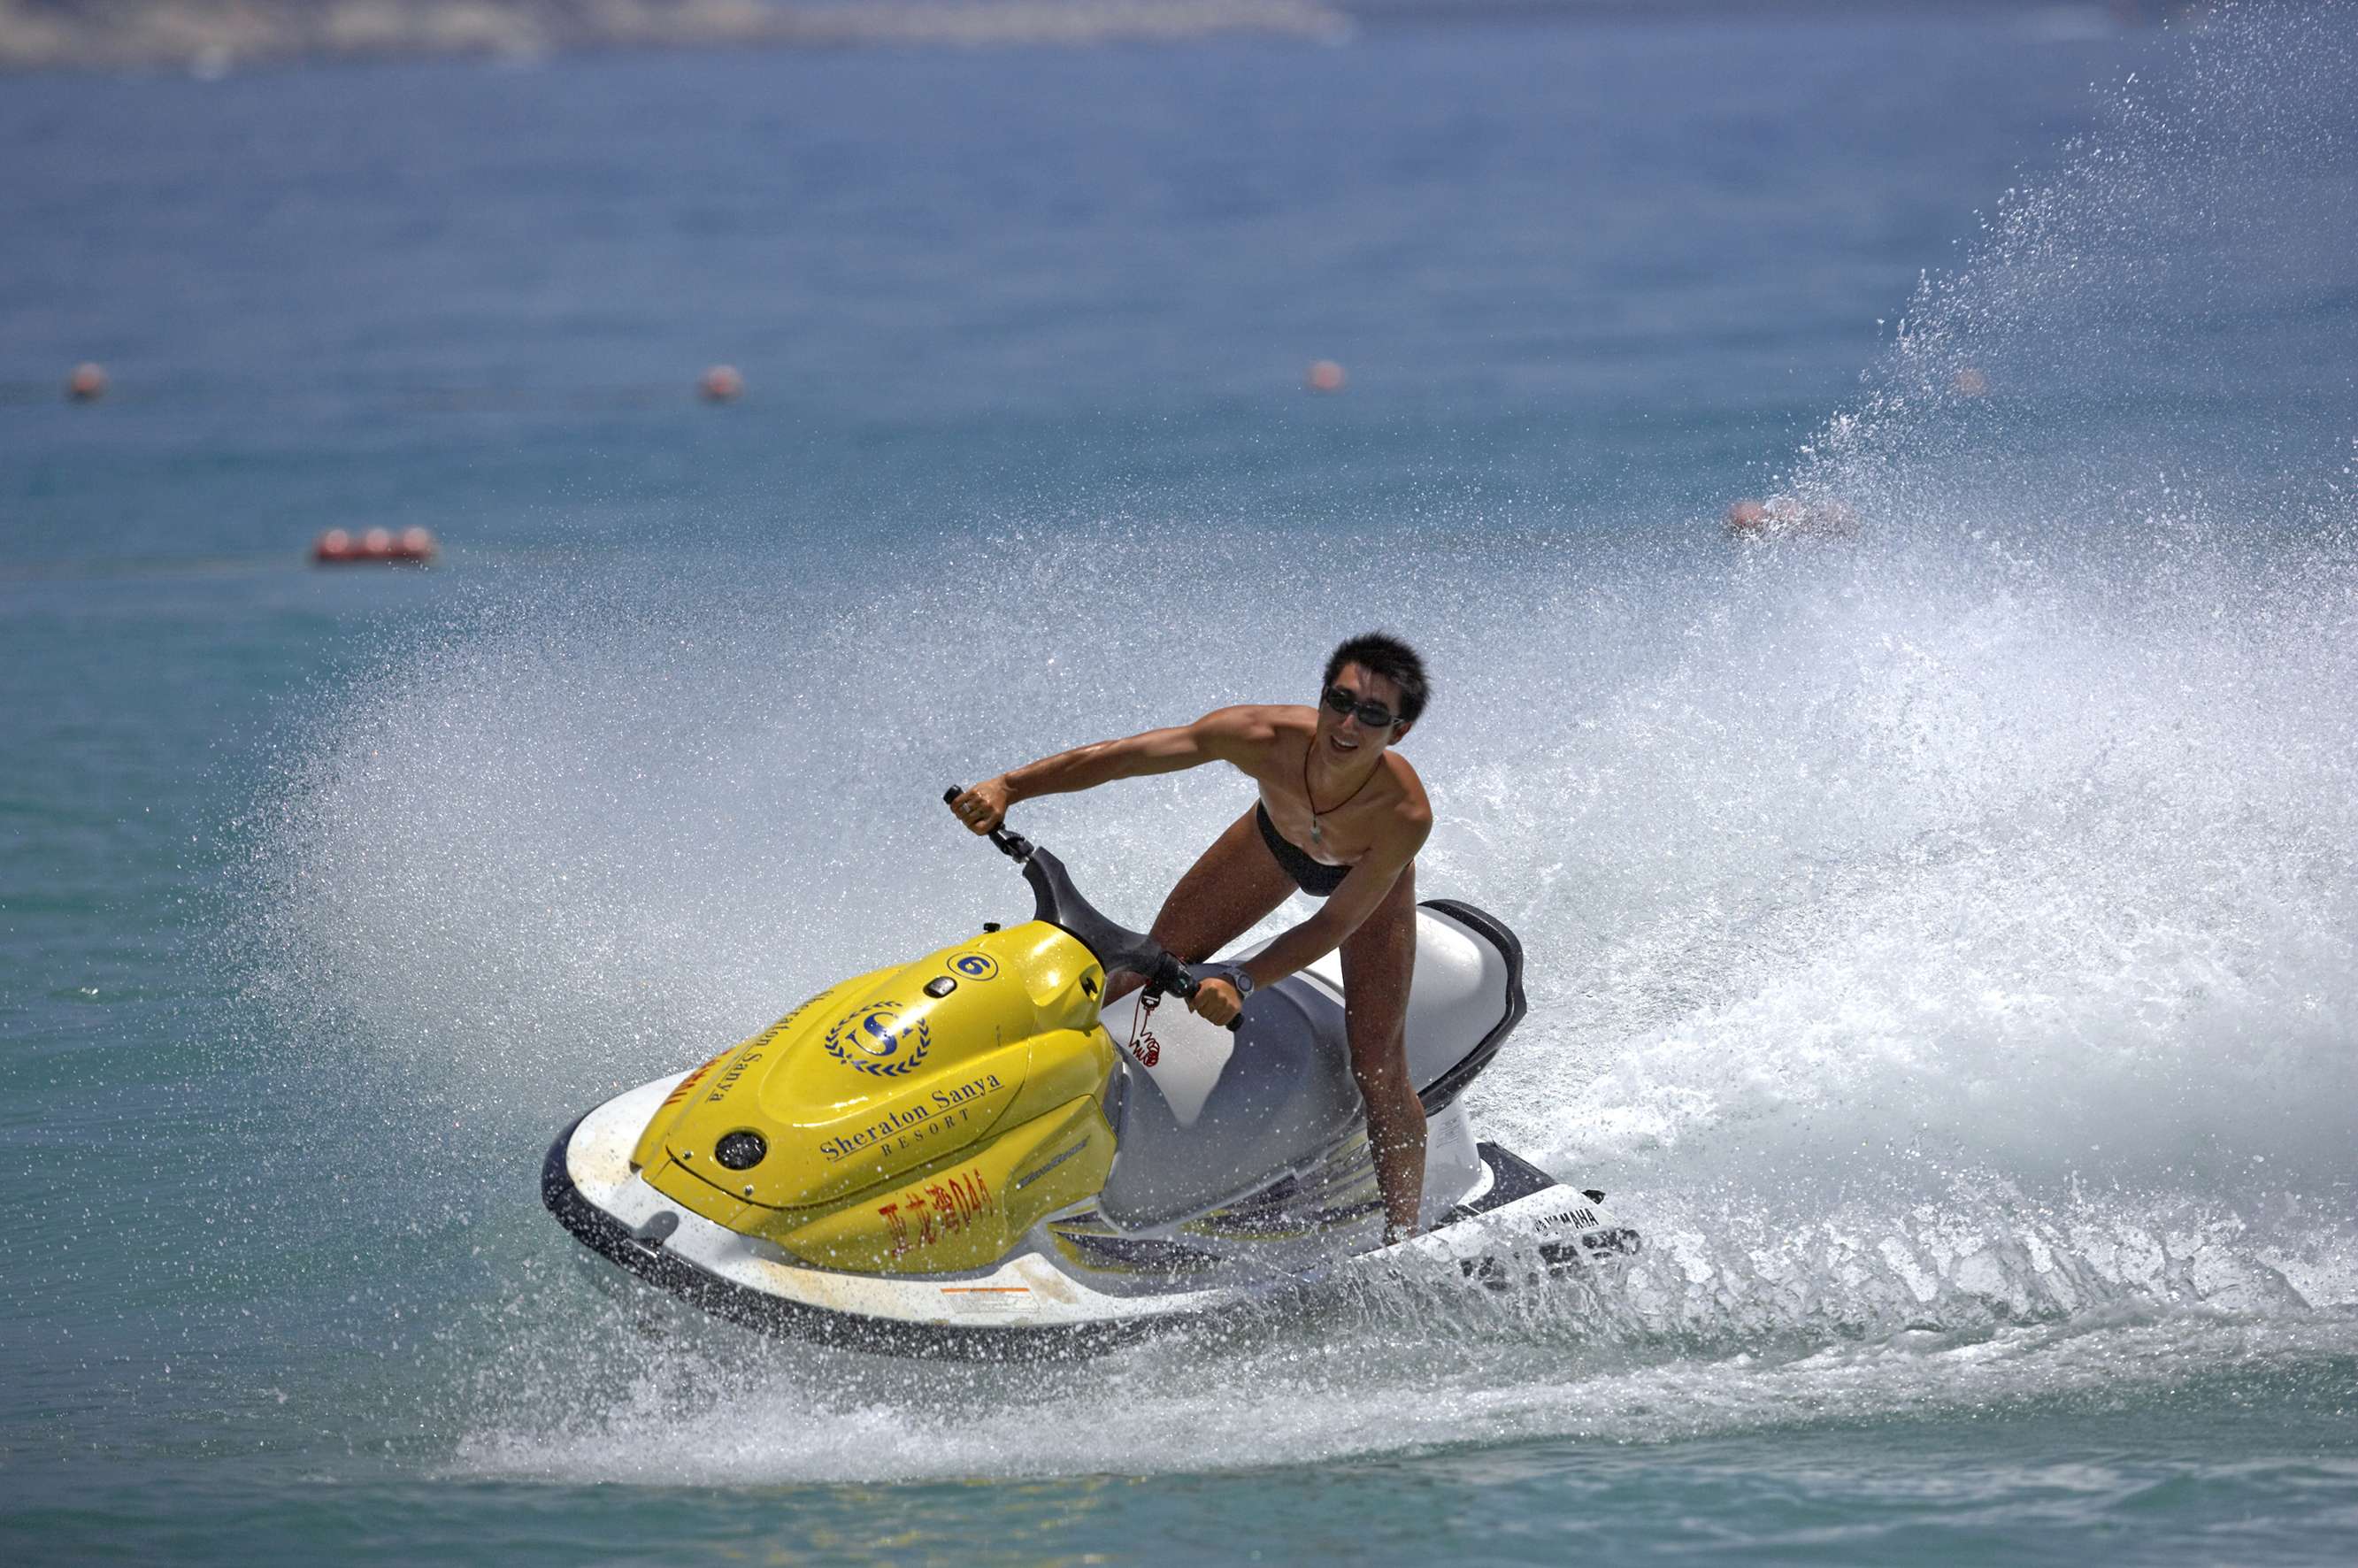 The opportunity to participate in a wide range of water sports is one of Sanya’s major selling points.